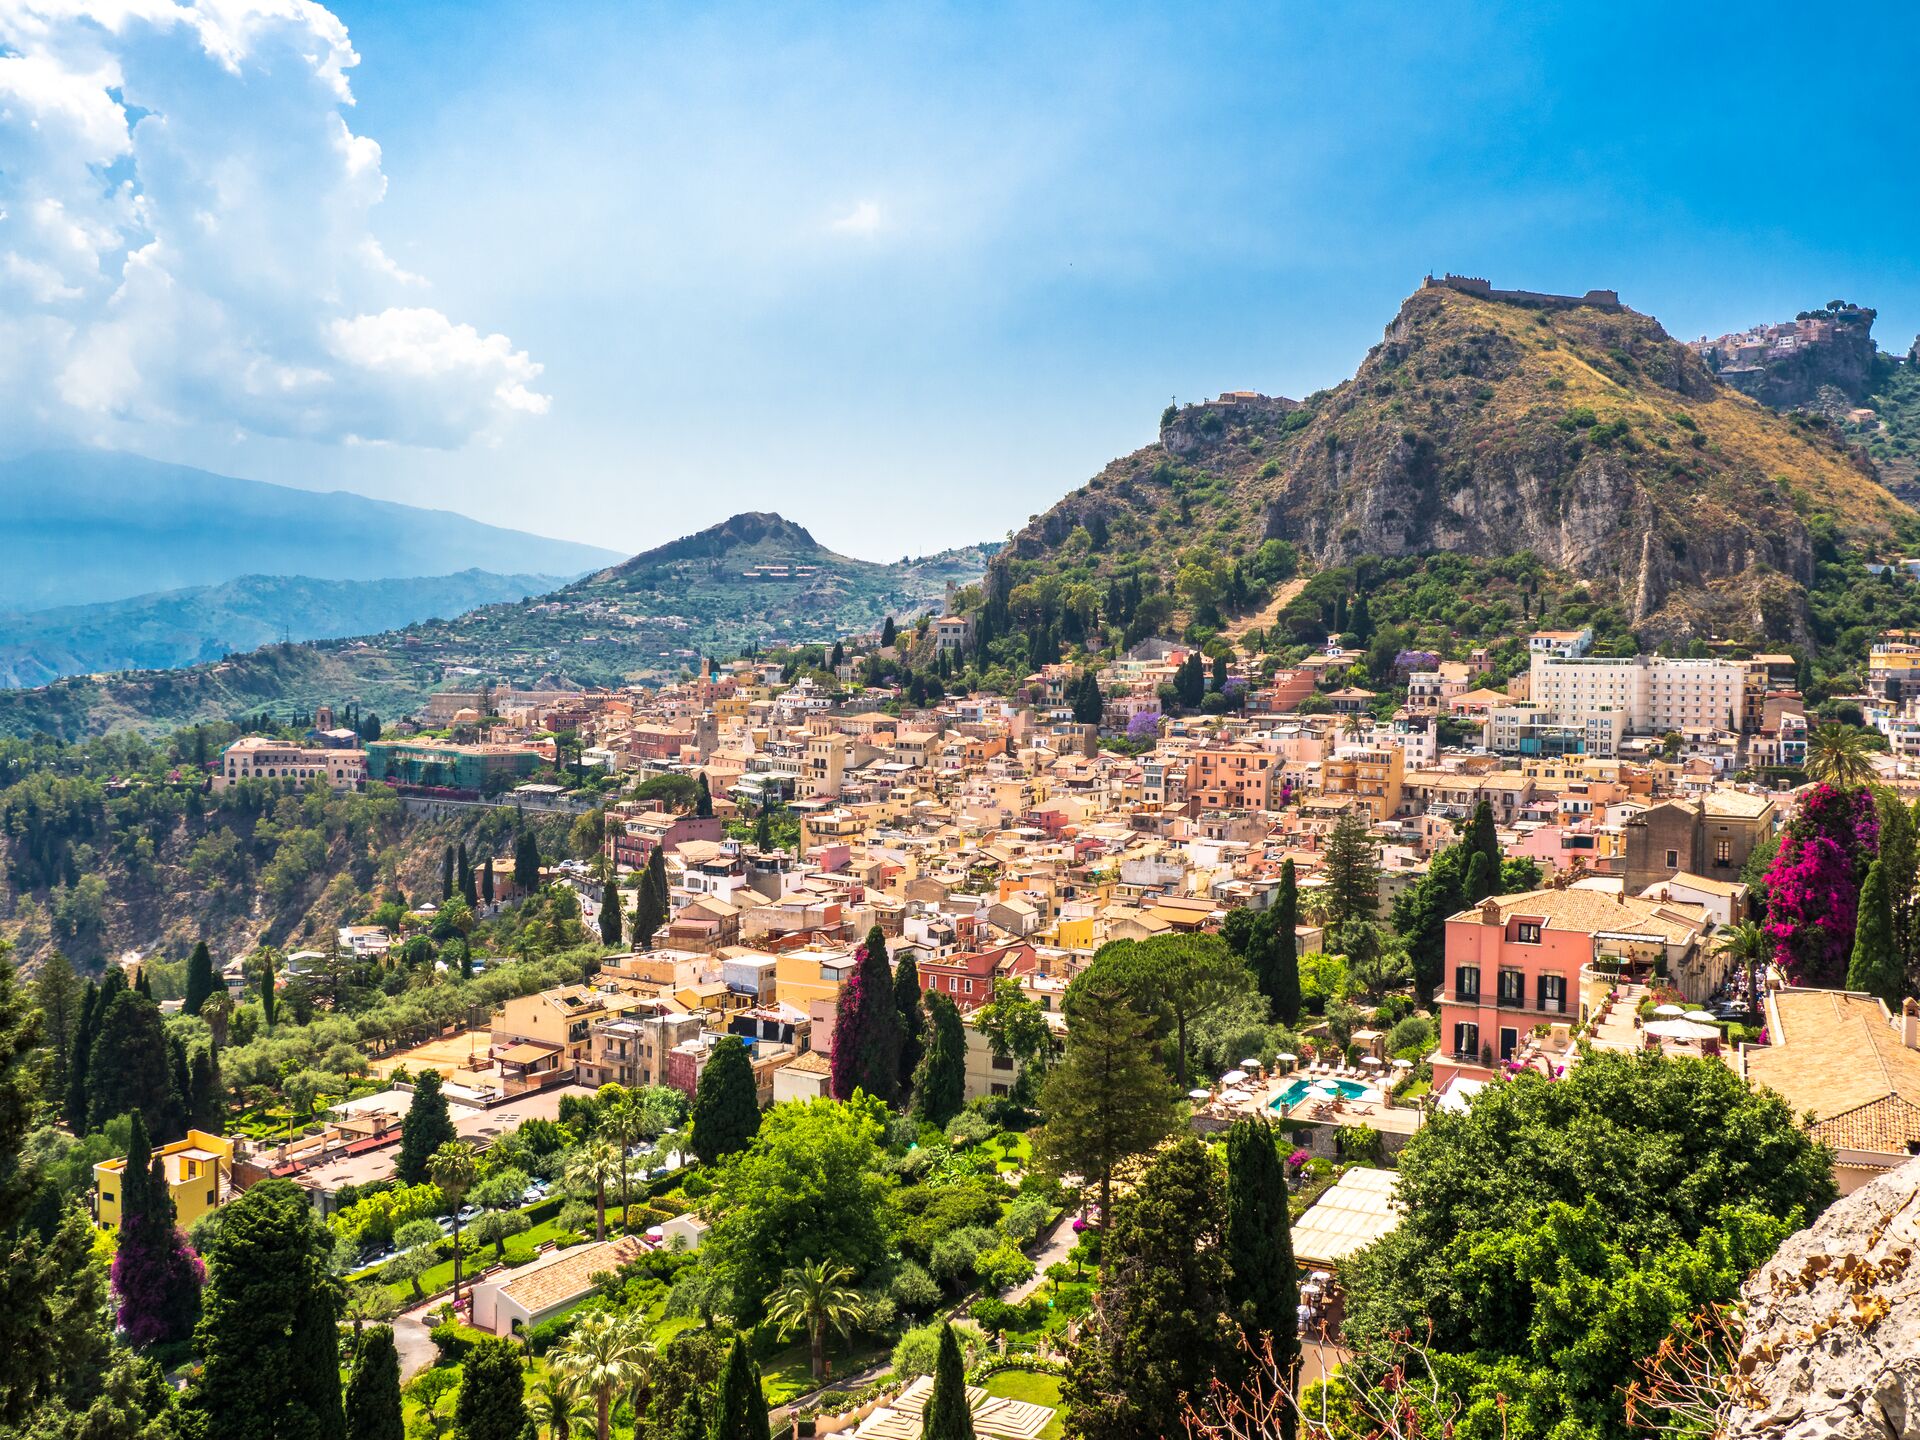 View across the golden houses of Taormina, with a blue sky and Mount Etna behind, and green trees in the foreground